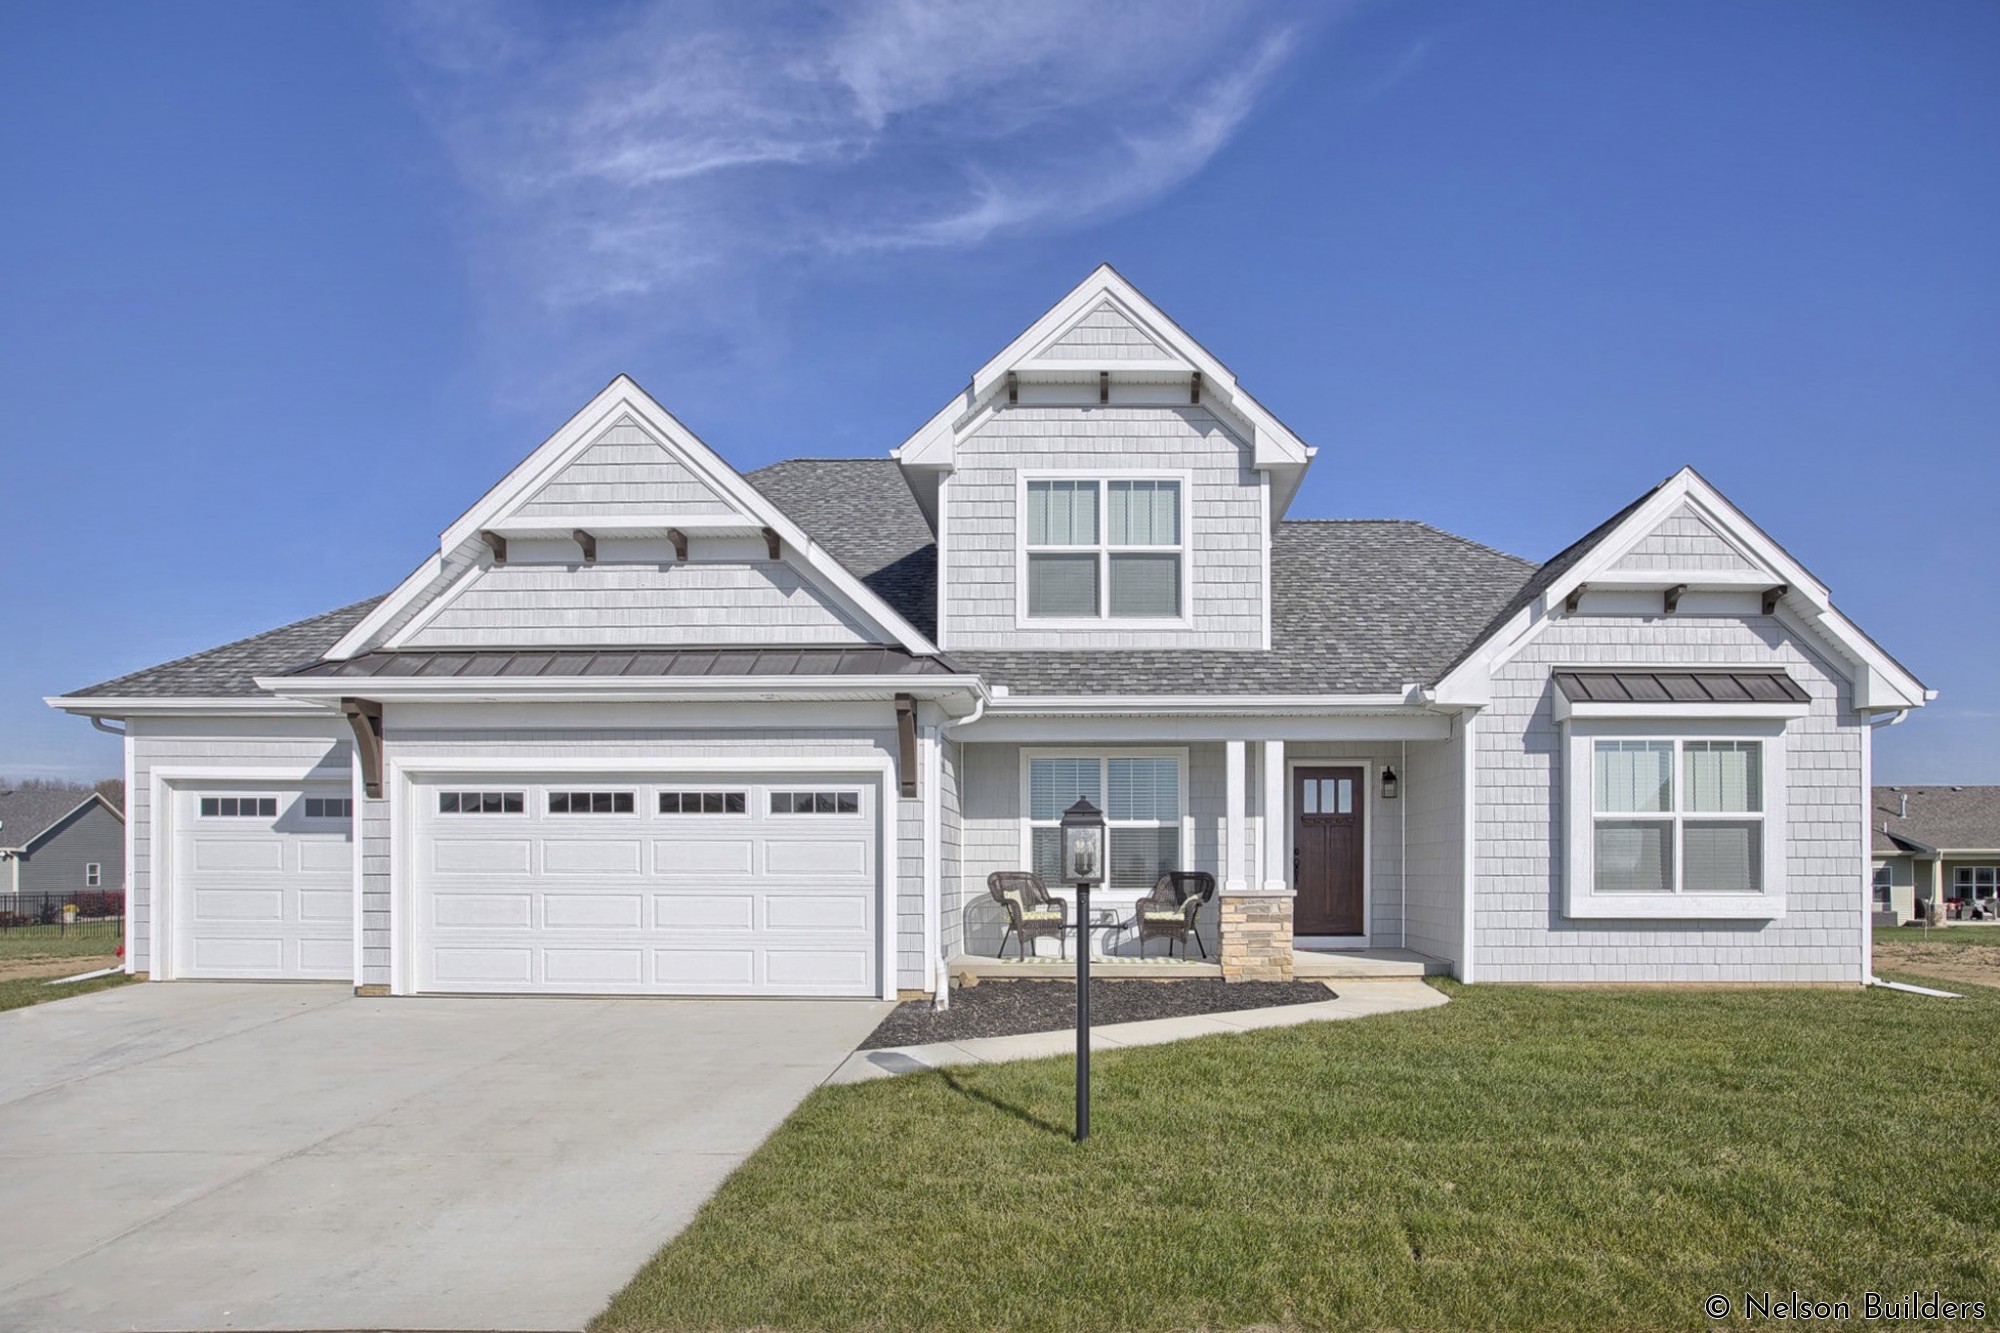 The beautiful exterior of a new Cherrydale plan in Whisper Meadow.